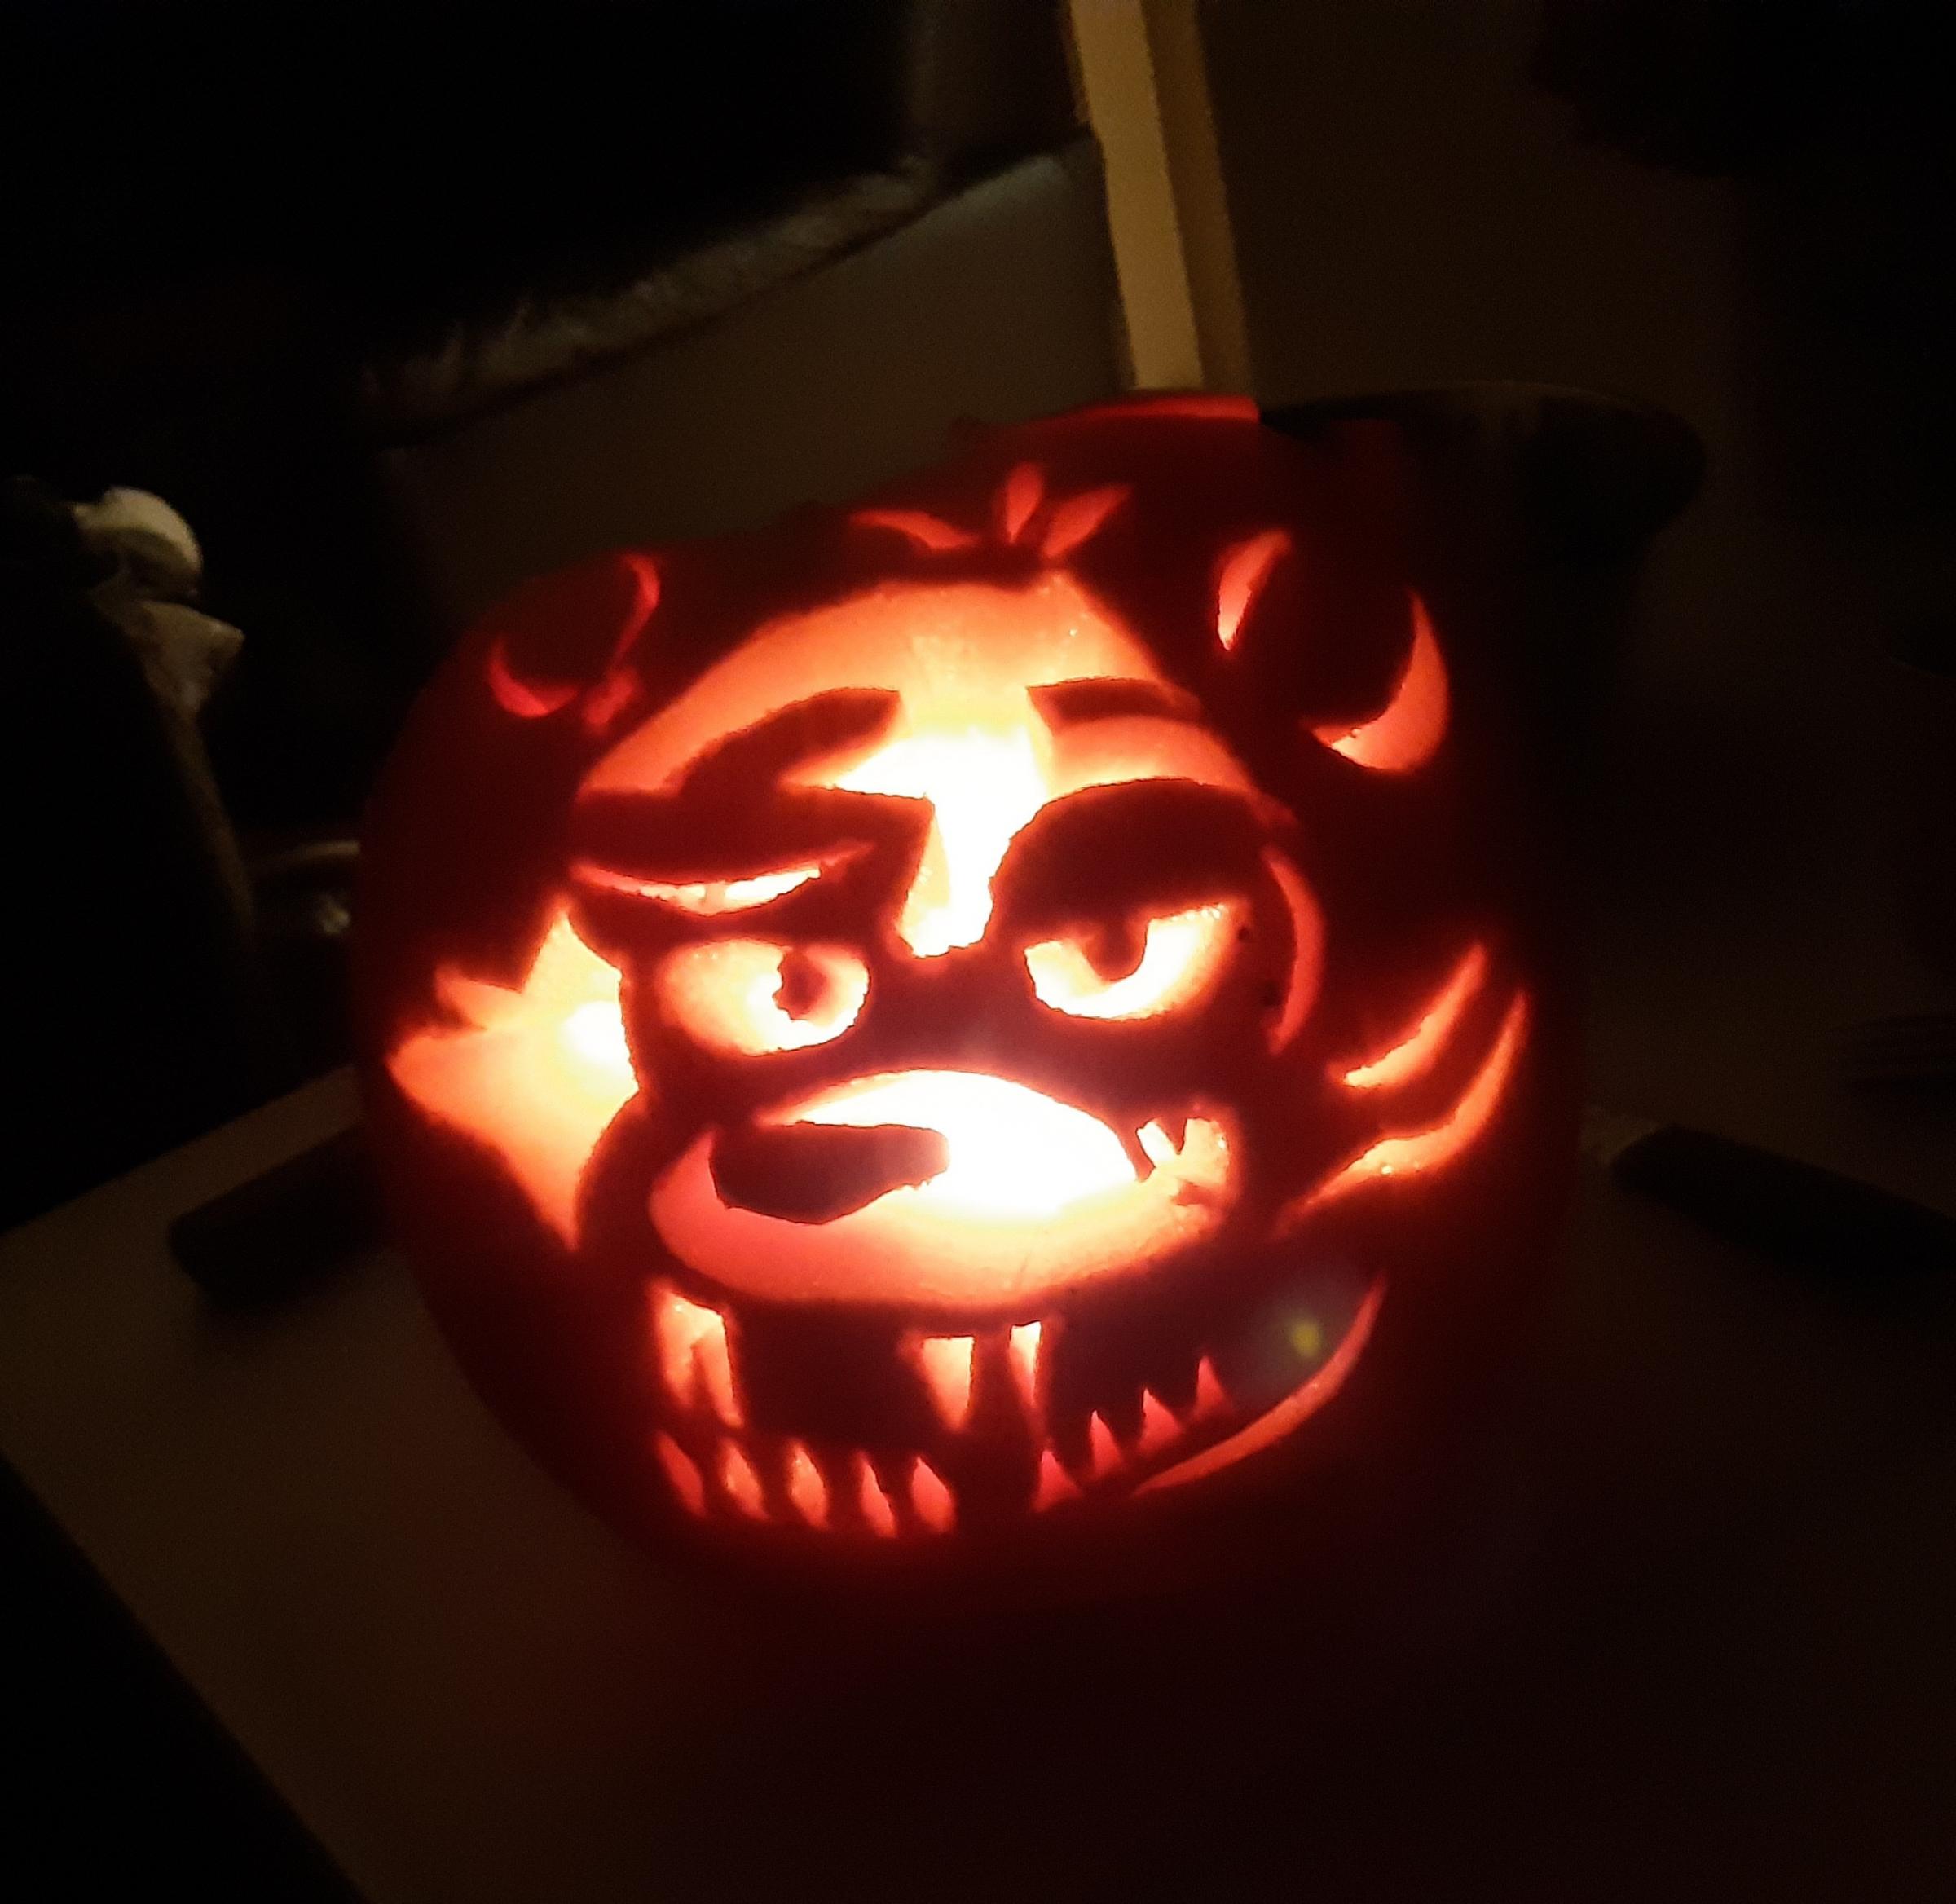 A Five Nights At Freddys effort by Leader community content editor Claire Pierce.